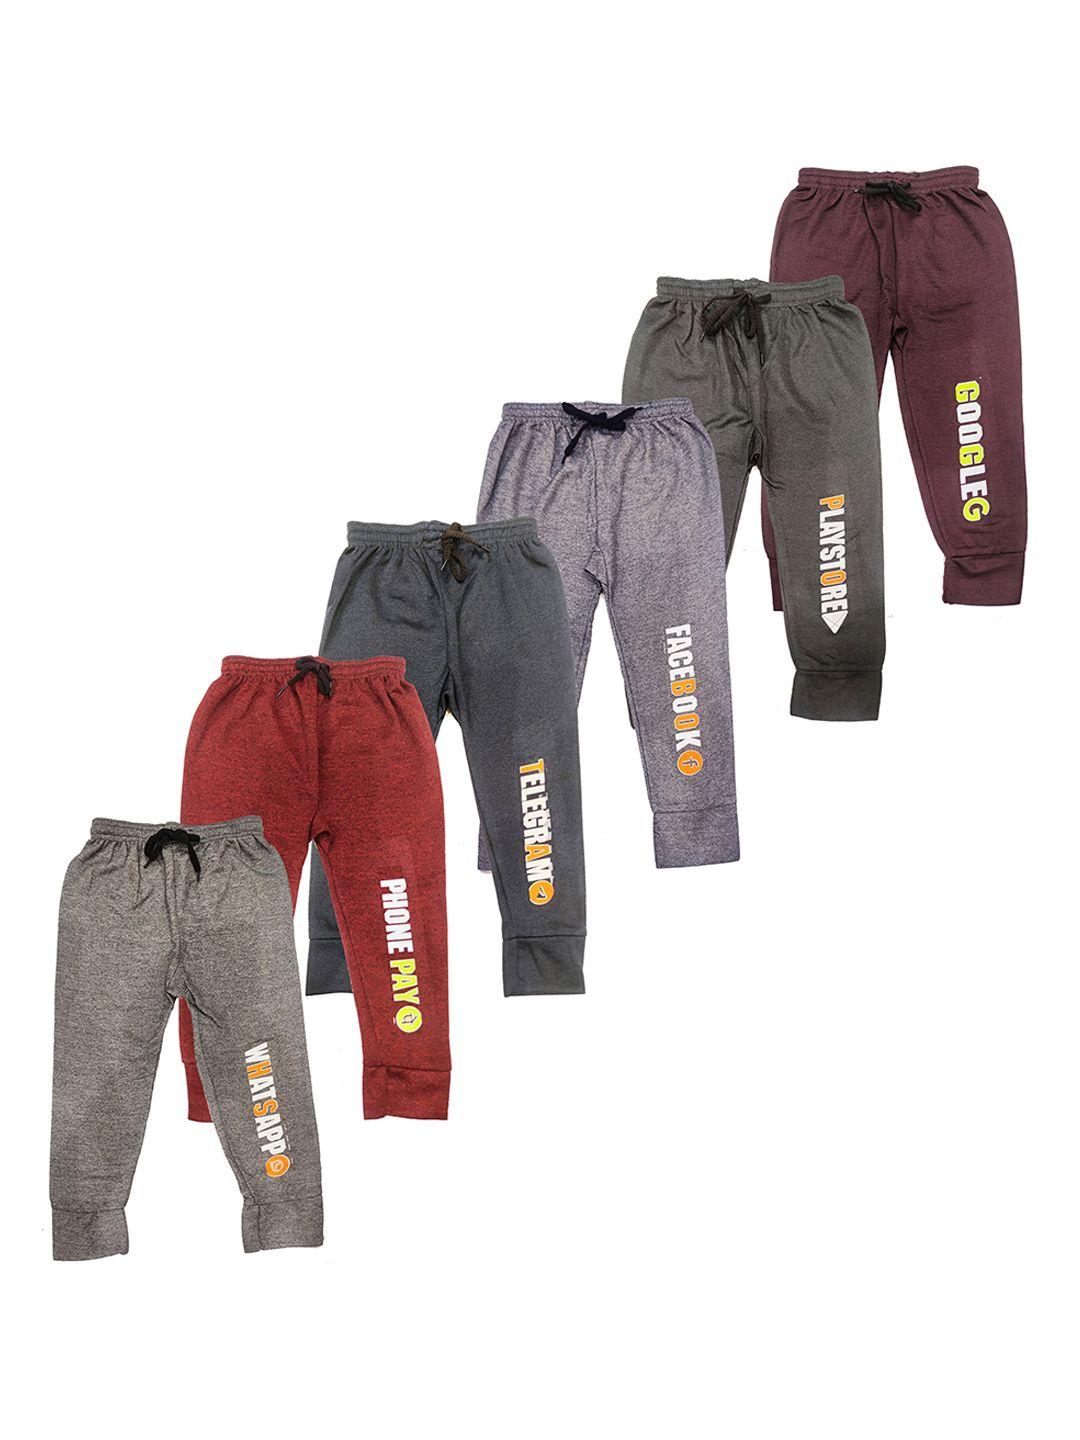 baesd kids pack of 6 printed relaxed fit mid-rise cotton joggers